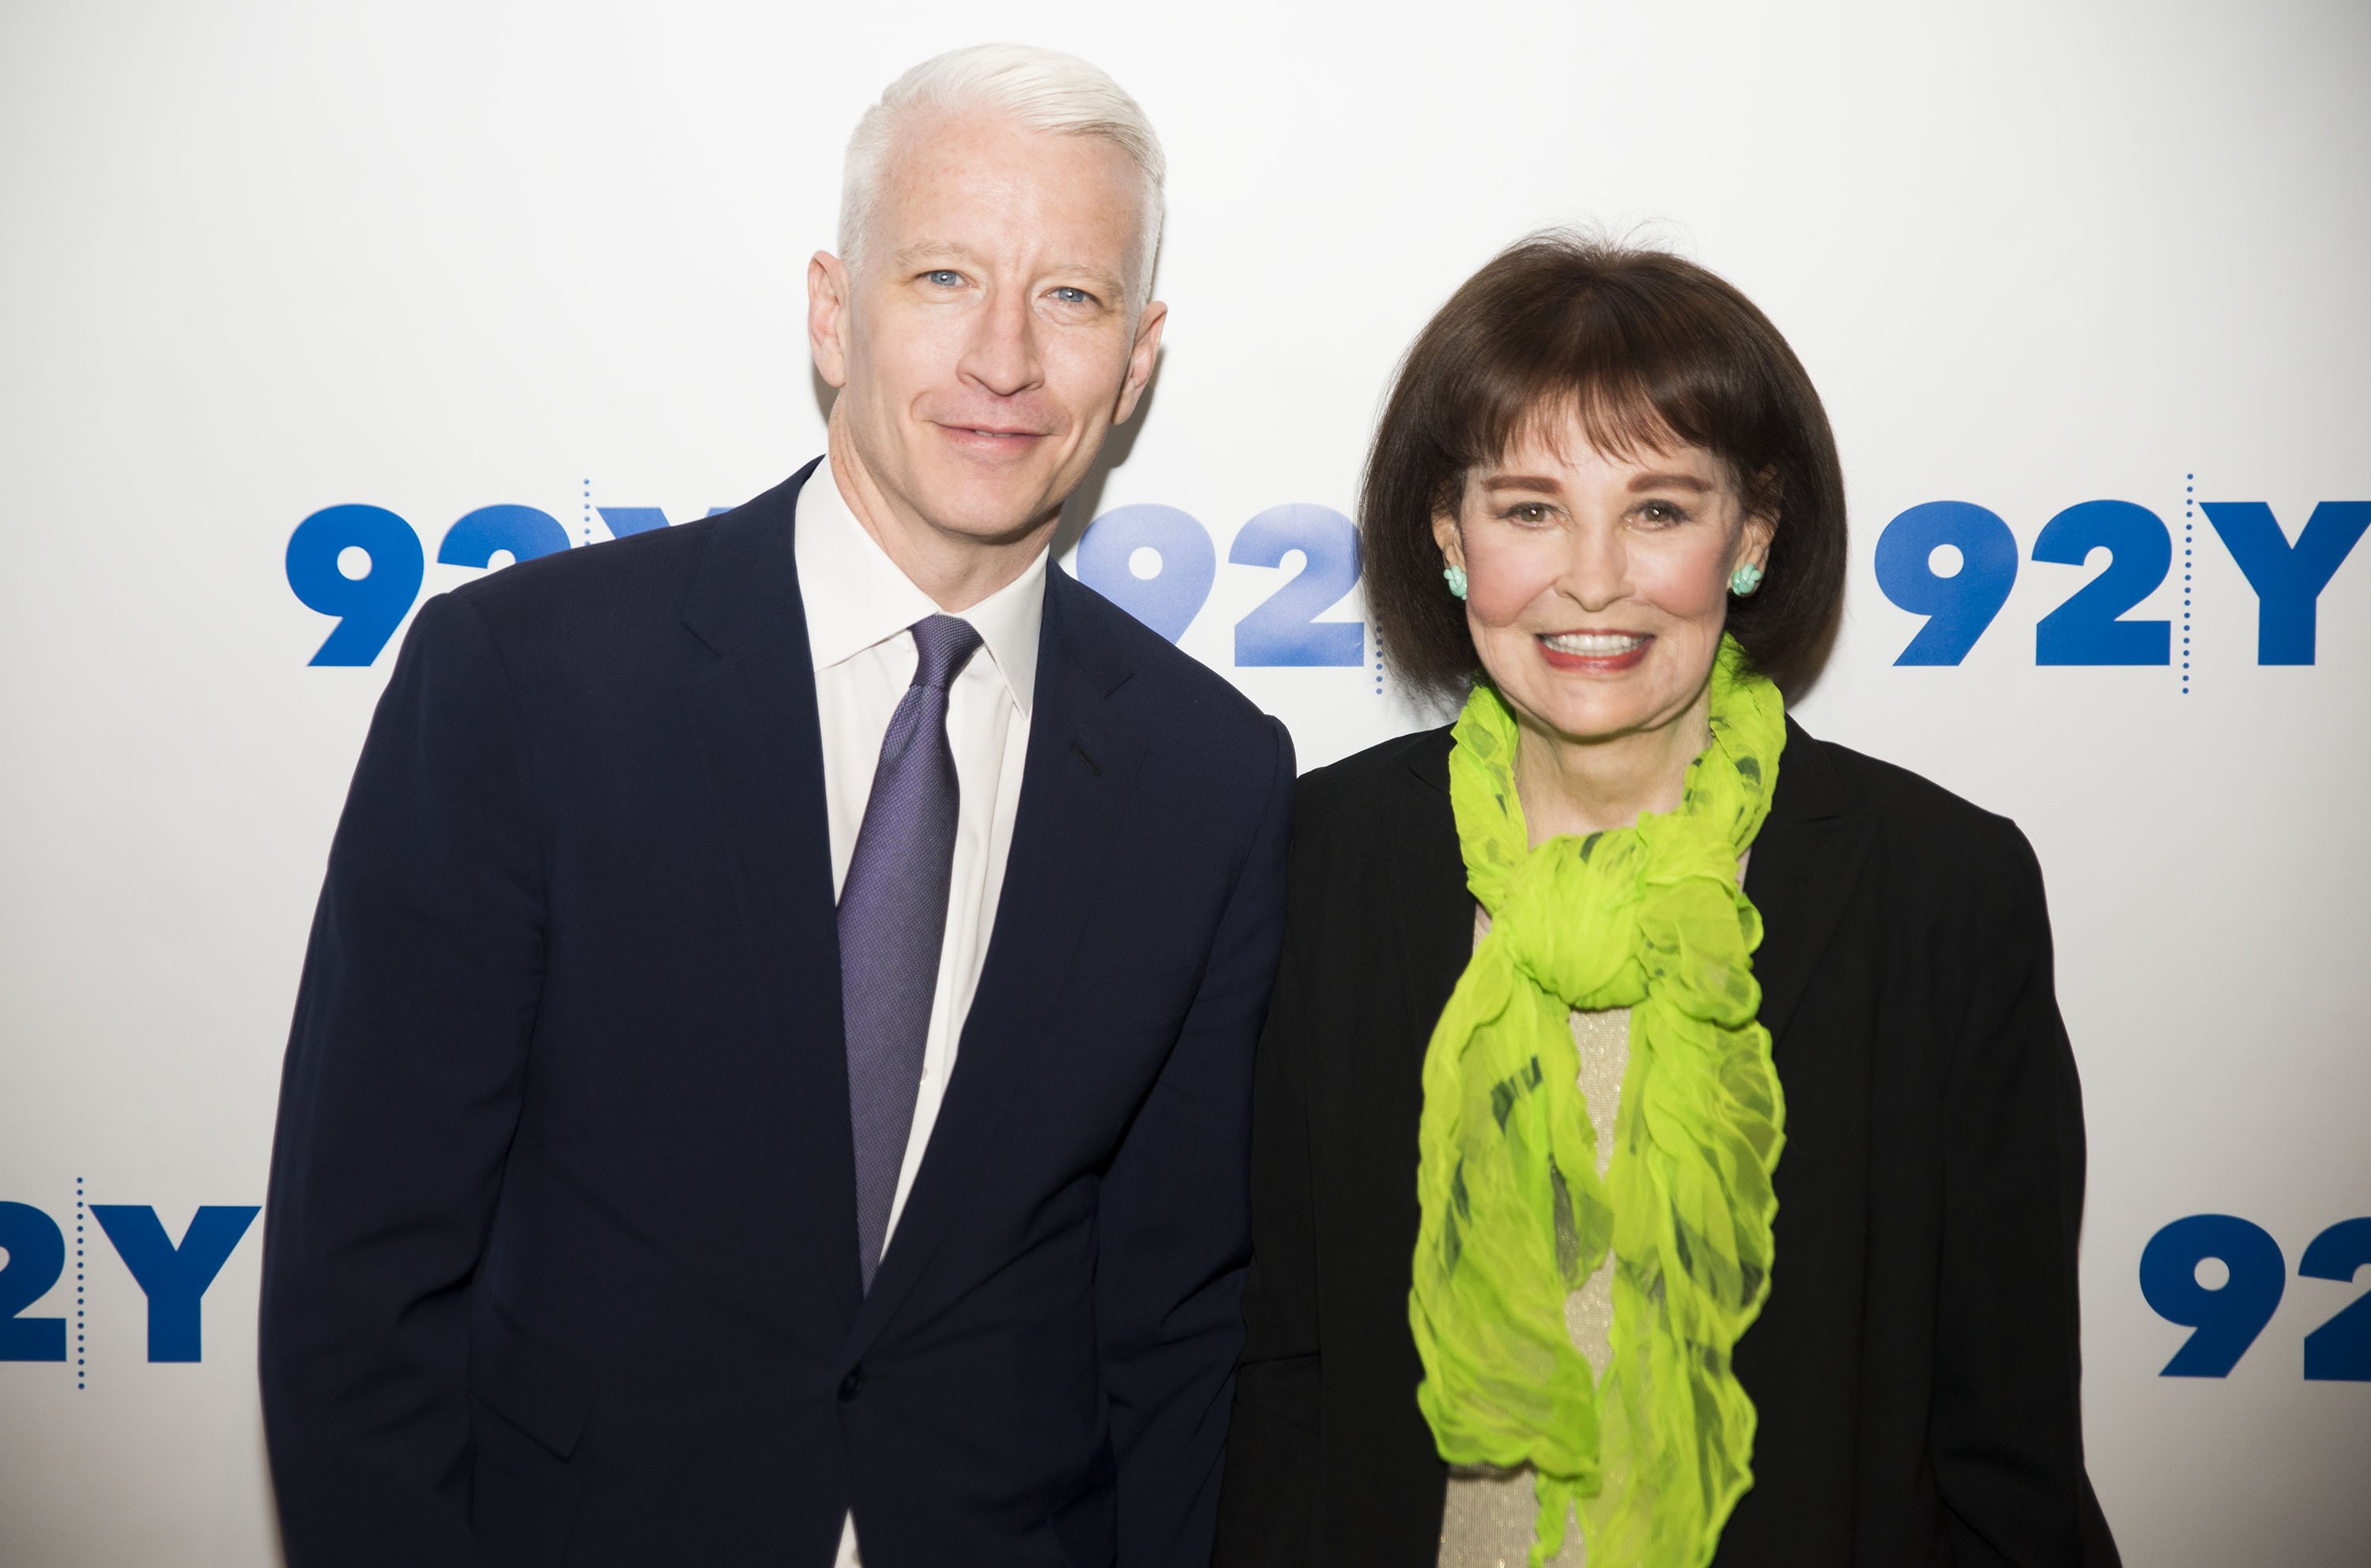 Anderson Cooper and Gloria Vanderbilt attend A Conversation With Anderson Cooper And Gloria Vanderbilt at 92Y on April 14, 2016 in New York City. | Source: Getty Images